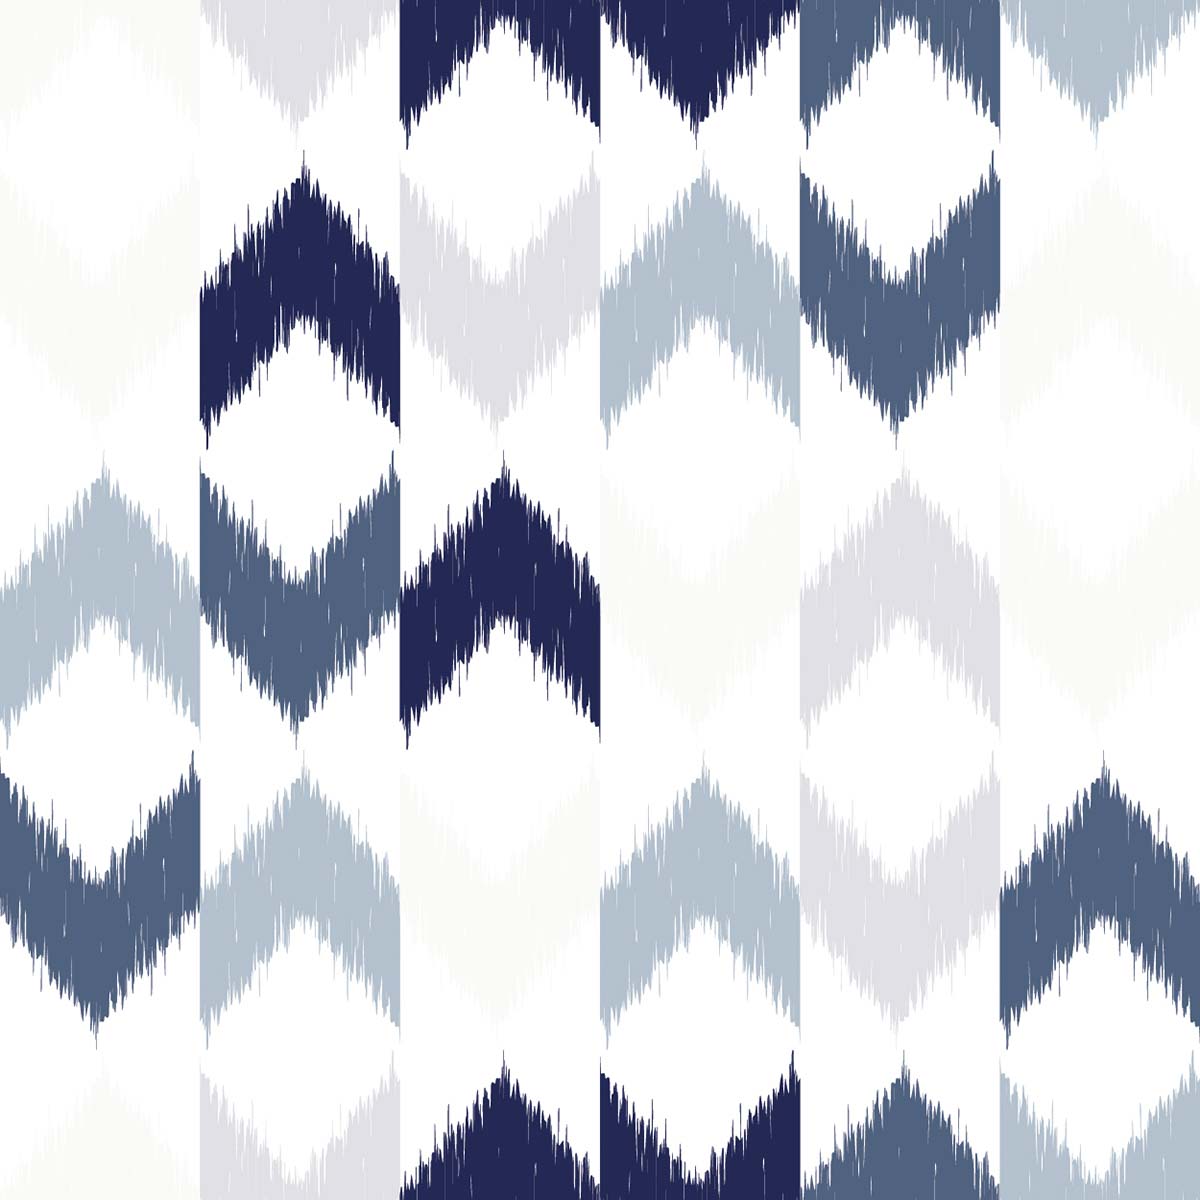 A blue and white pattern